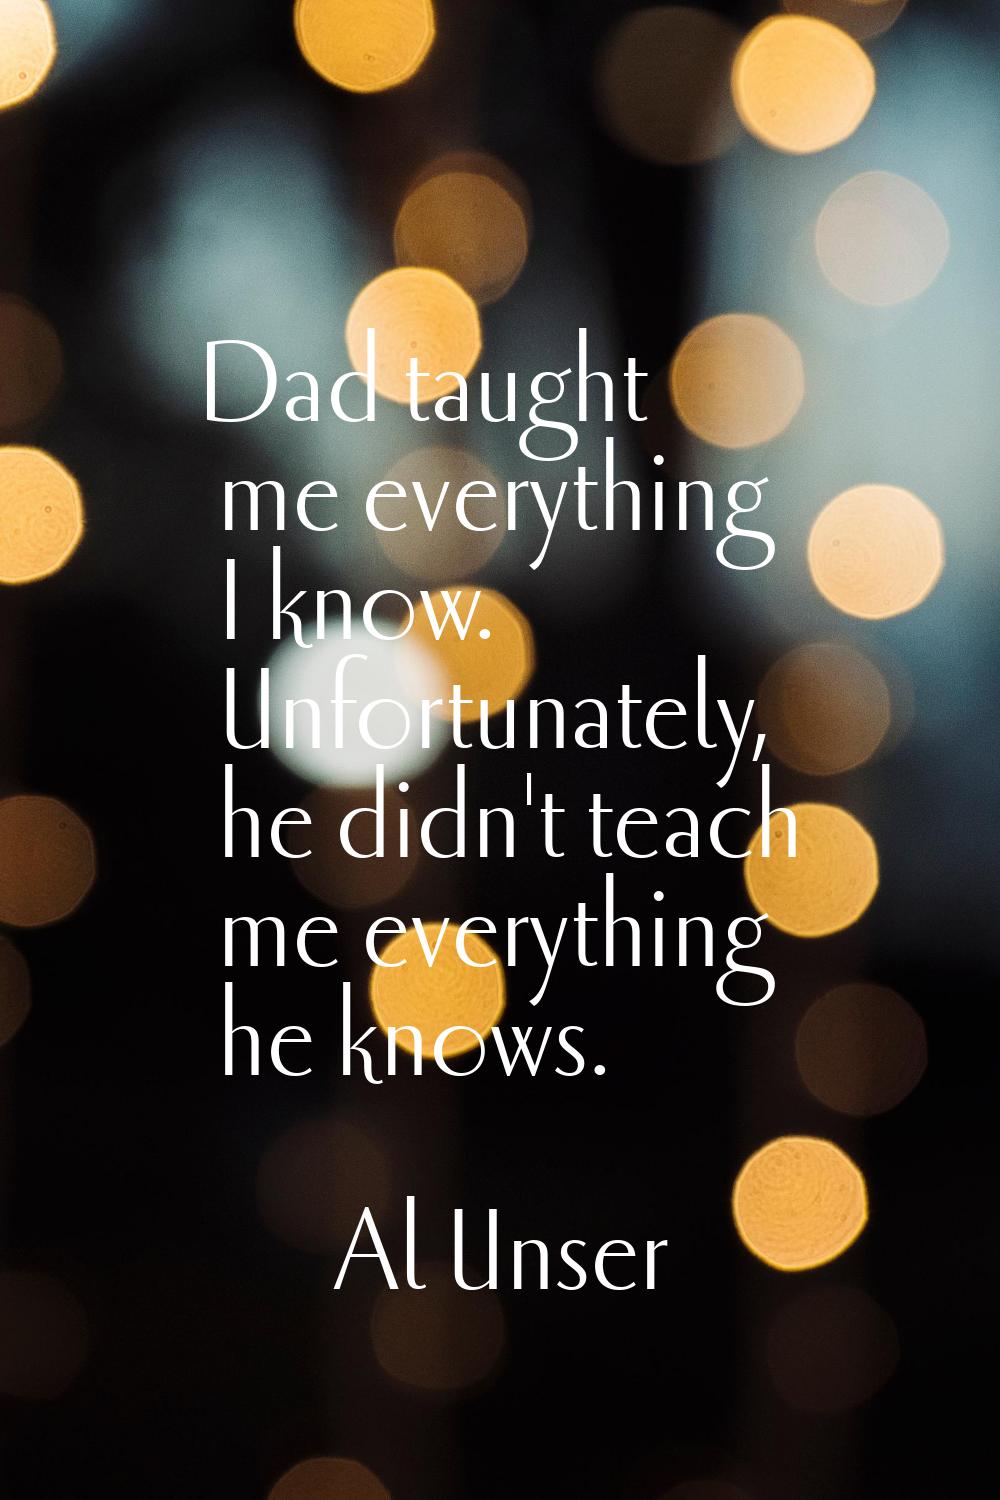 Dad taught me everything I know. Unfortunately, he didn't teach me everything he knows.